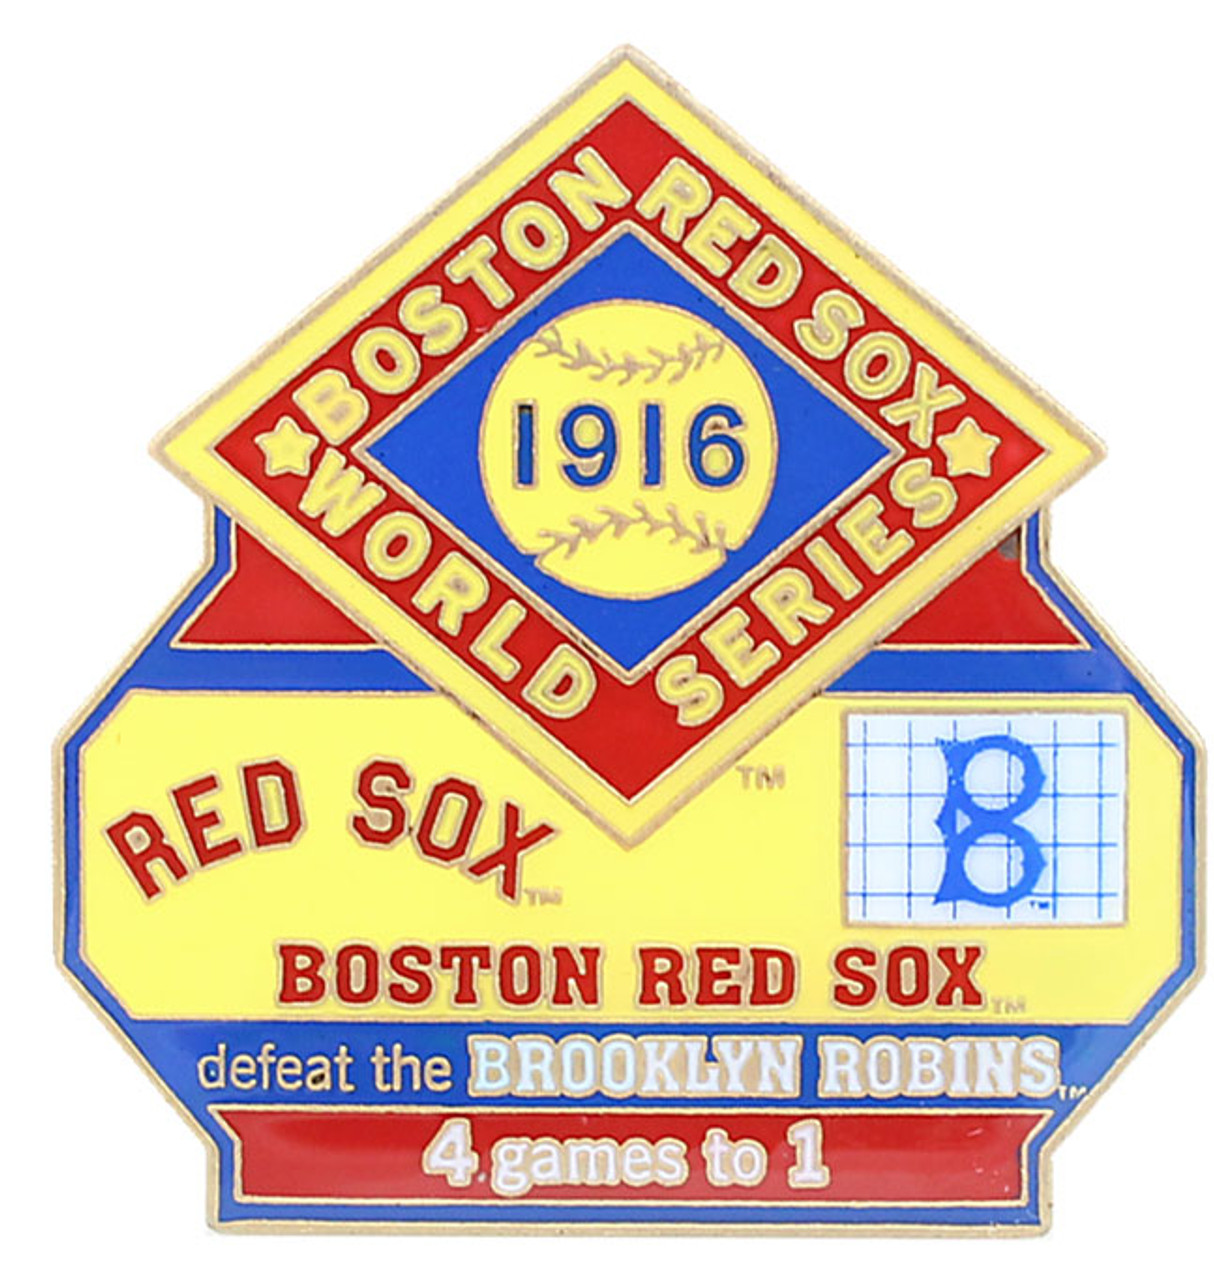 Red Sox giving away commemorative World Series rings